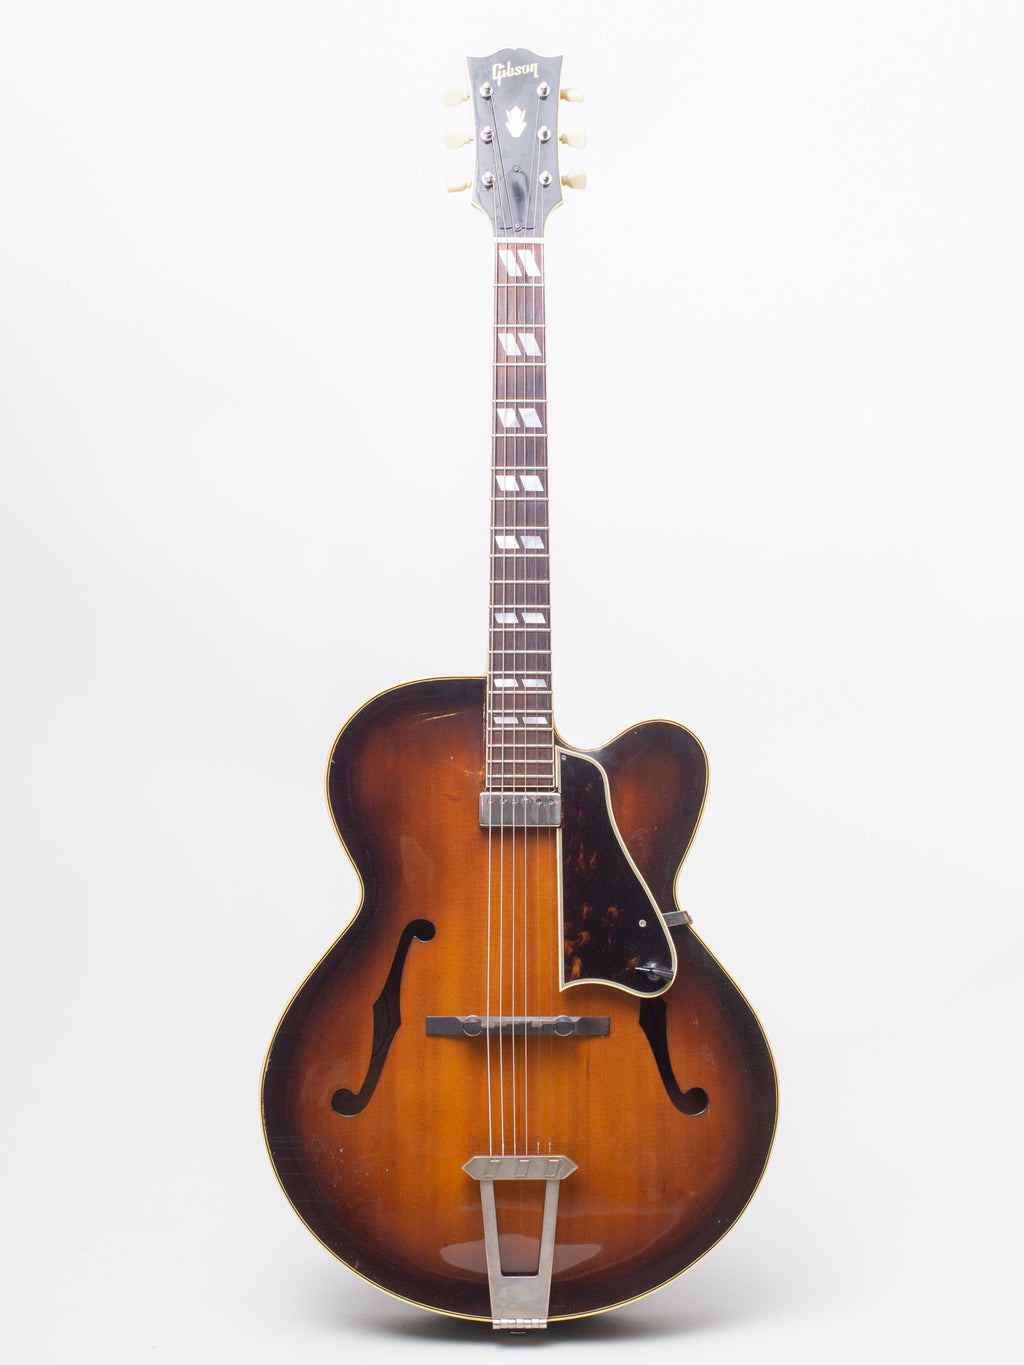 1948 Gibson L-7P